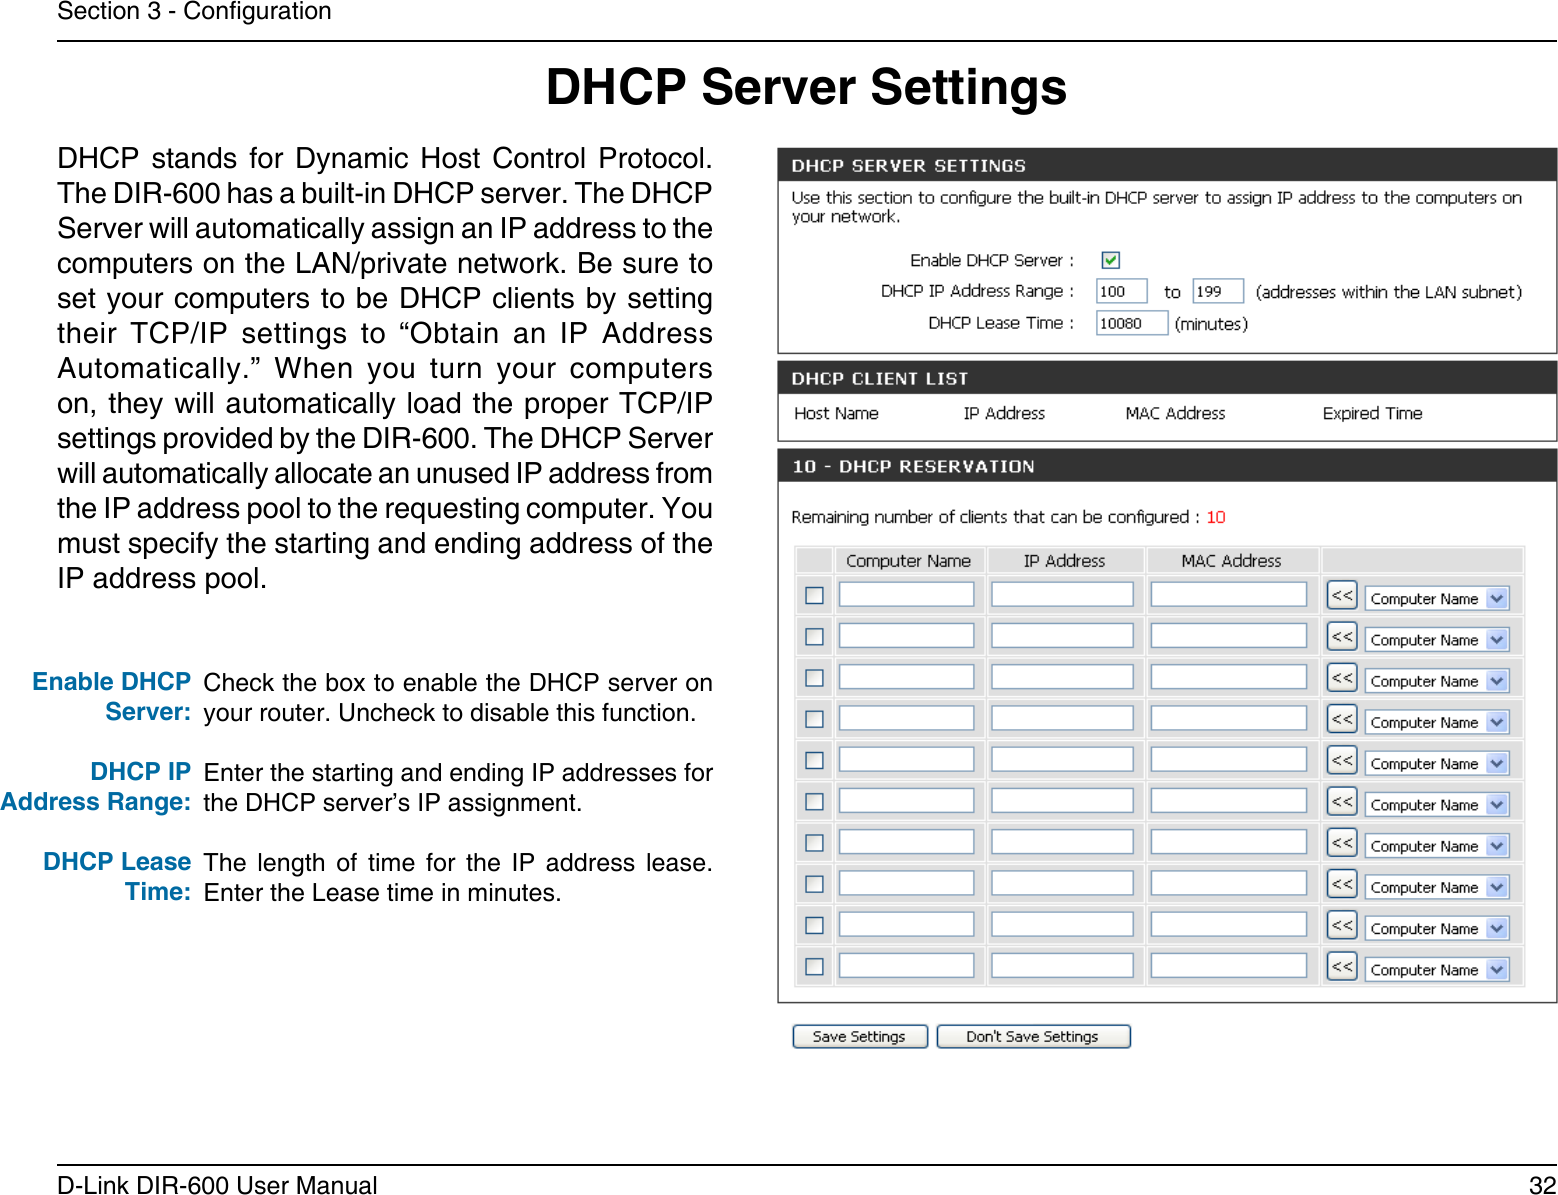 32D-Link DIR-600 User ManualSection 3 - CongurationCheck the box to enable the DHCP server on your router. Uncheck to disable this function.Enter the starting and ending IP addresses for the DHCP server’s IP assignment.The  length  of  time  for  the  IP  address  lease. Enter the Lease time in minutes.Enable DHCP Server:DHCP IPAddress Range:DHCP Lease Time:DHCP Server SettingsDHCP  stands  for  Dynamic  Host  Control  Protocol. The DIR-600 has a built-in DHCP server. The DHCP Server will automatically assign an IP address to the computers on the LAN/private network. Be sure to set your computers to be DHCP clients by setting their  TCP/IP  settings  to  “Obtain  an  IP  Address Automatically.”  When  you  turn  your  computers on, they will automatically load the proper TCP/IP settings provided by the DIR-600. The DHCP Server will automatically allocate an unused IP address from the IP address pool to the requesting computer. You must specify the starting and ending address of the IP address pool.